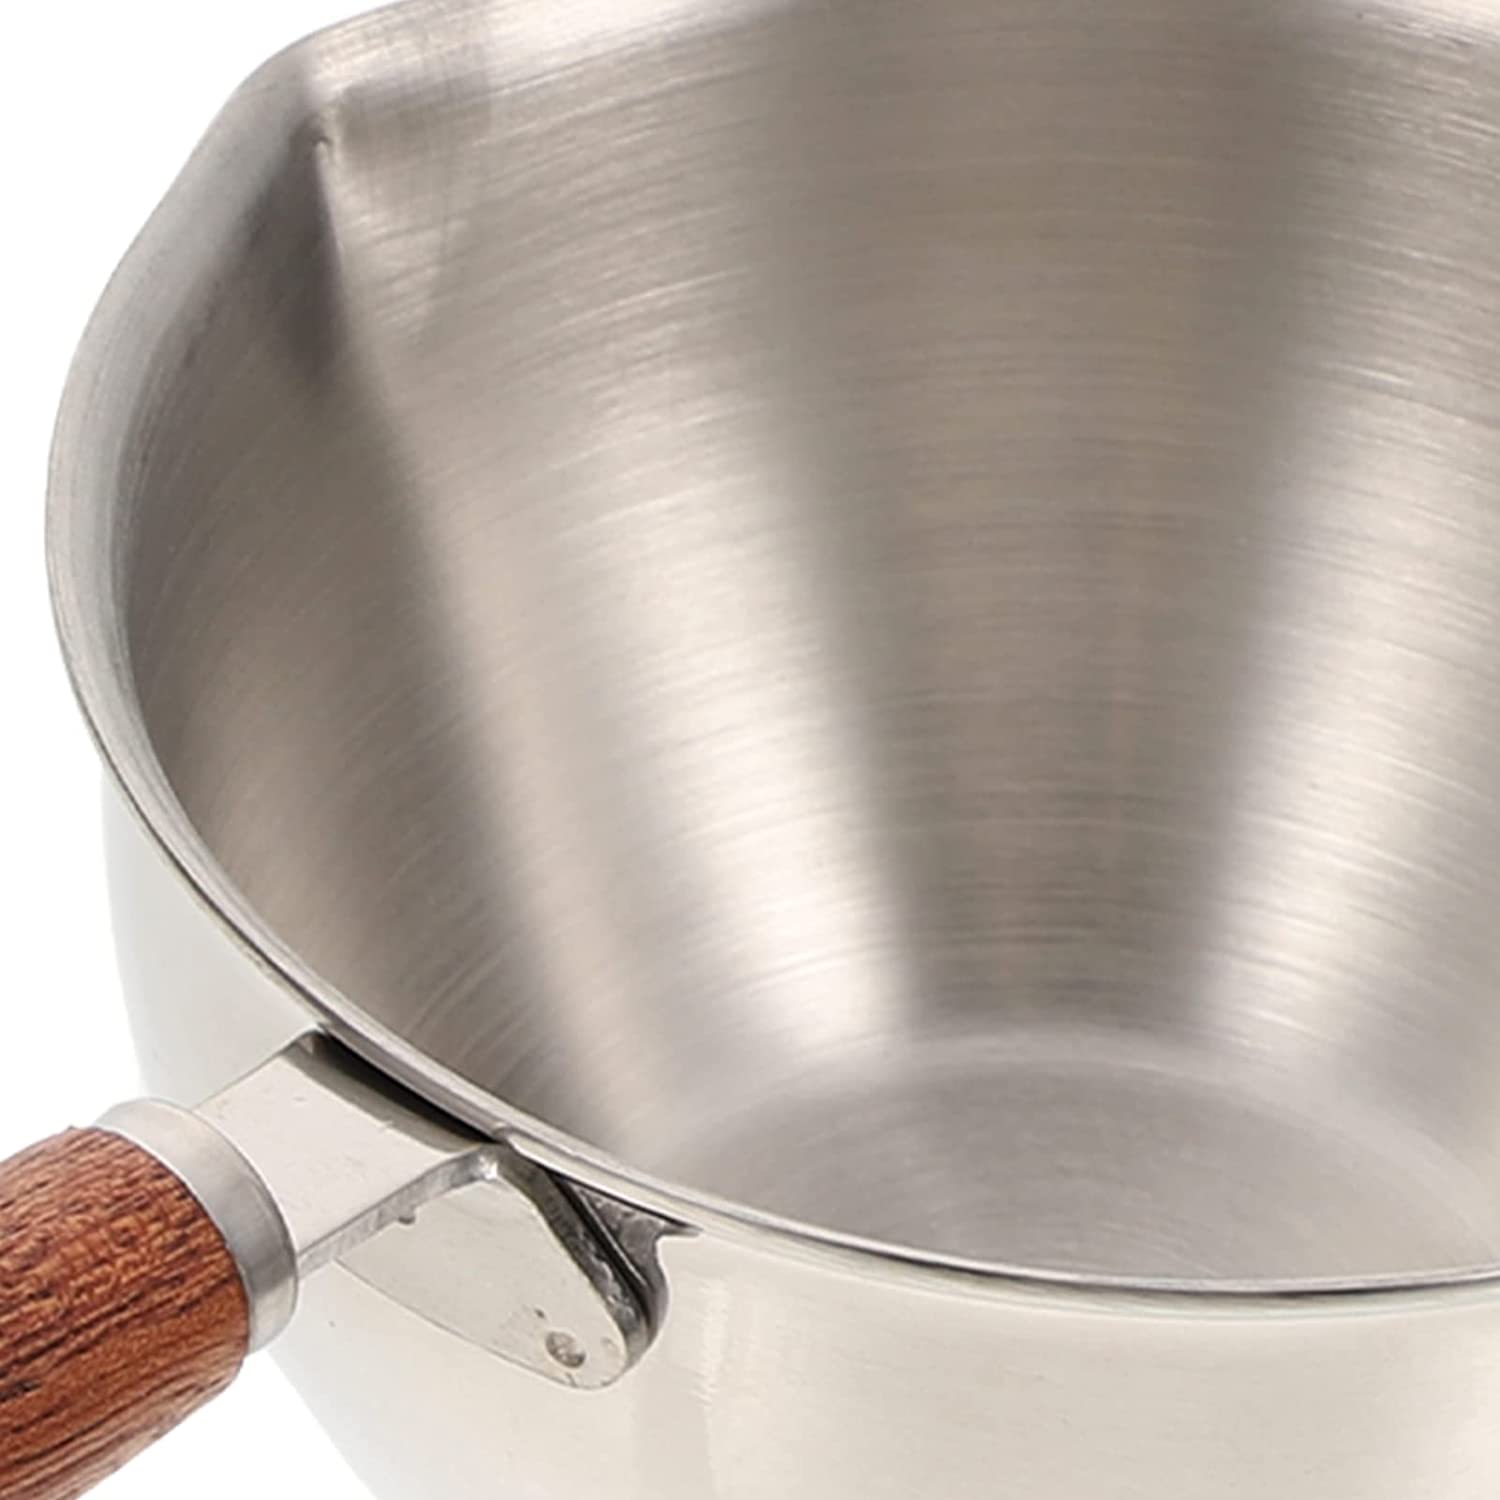 Wood Handle Oil Pot Small Milk Pot Stainless Steel Saucepan with Handle  Small Pouring Oil Pot